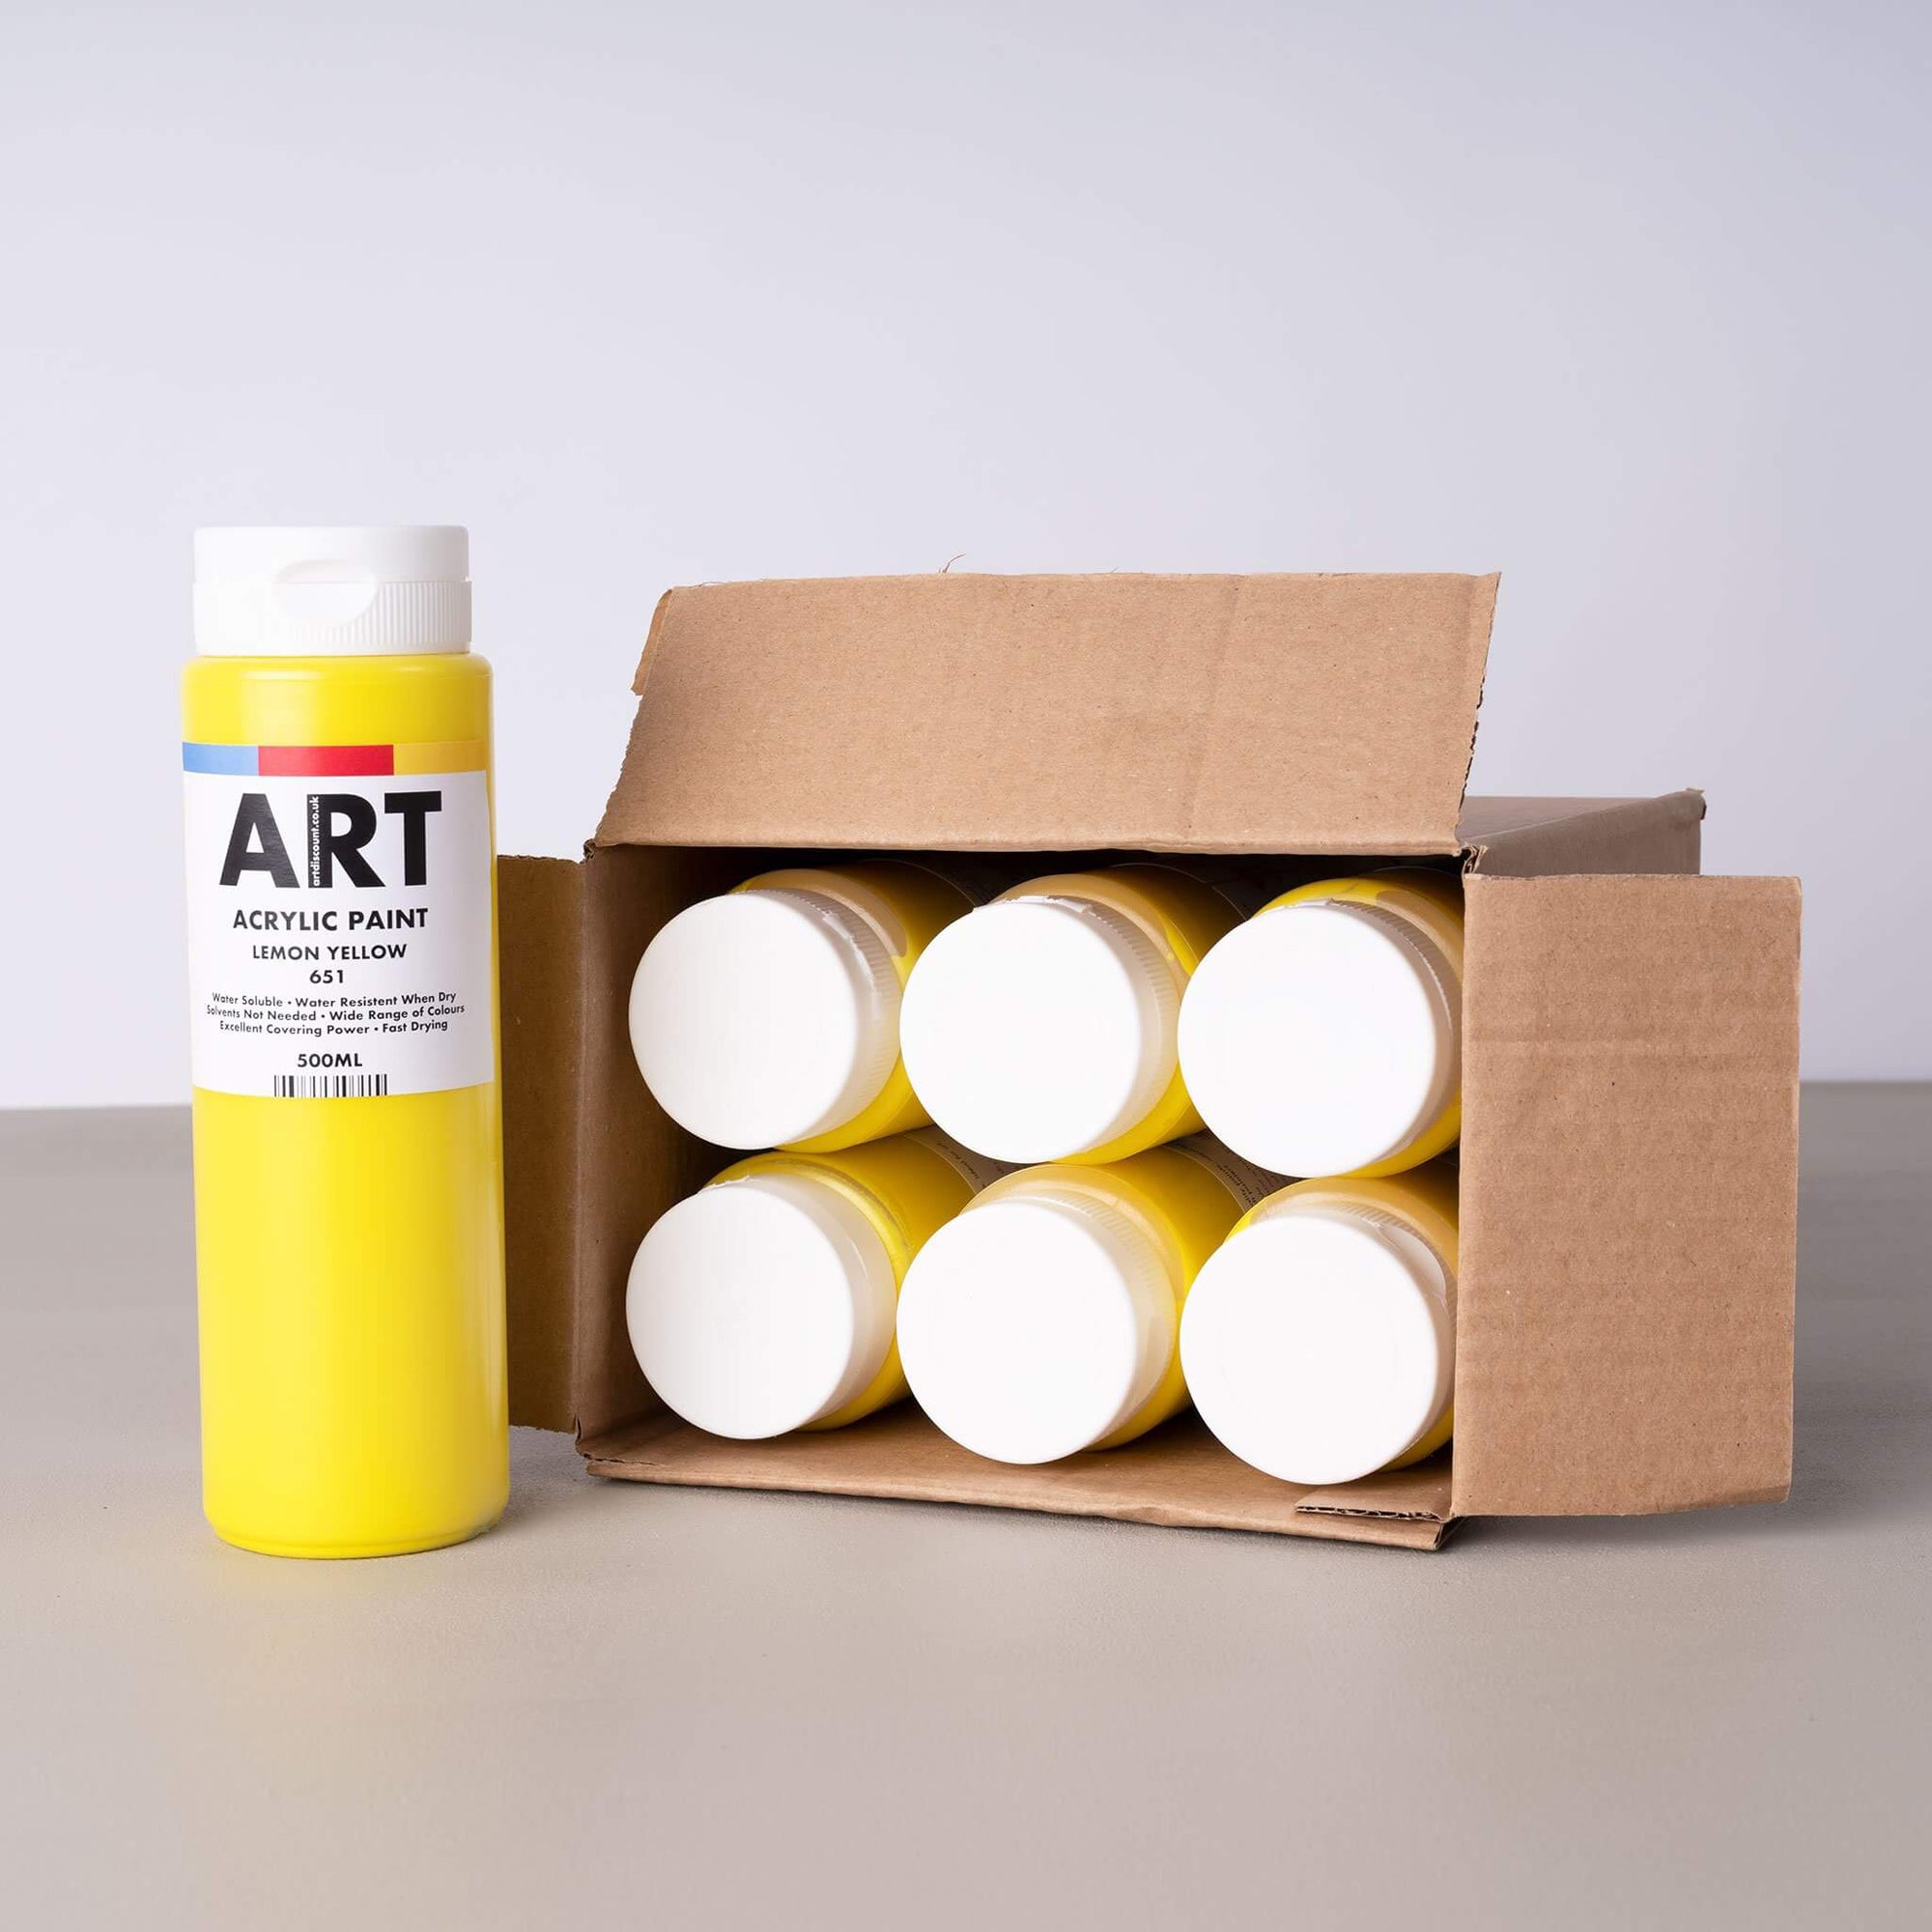 ARTdiscount Acrylic Paint in 500ml - Single colour - pack of 6